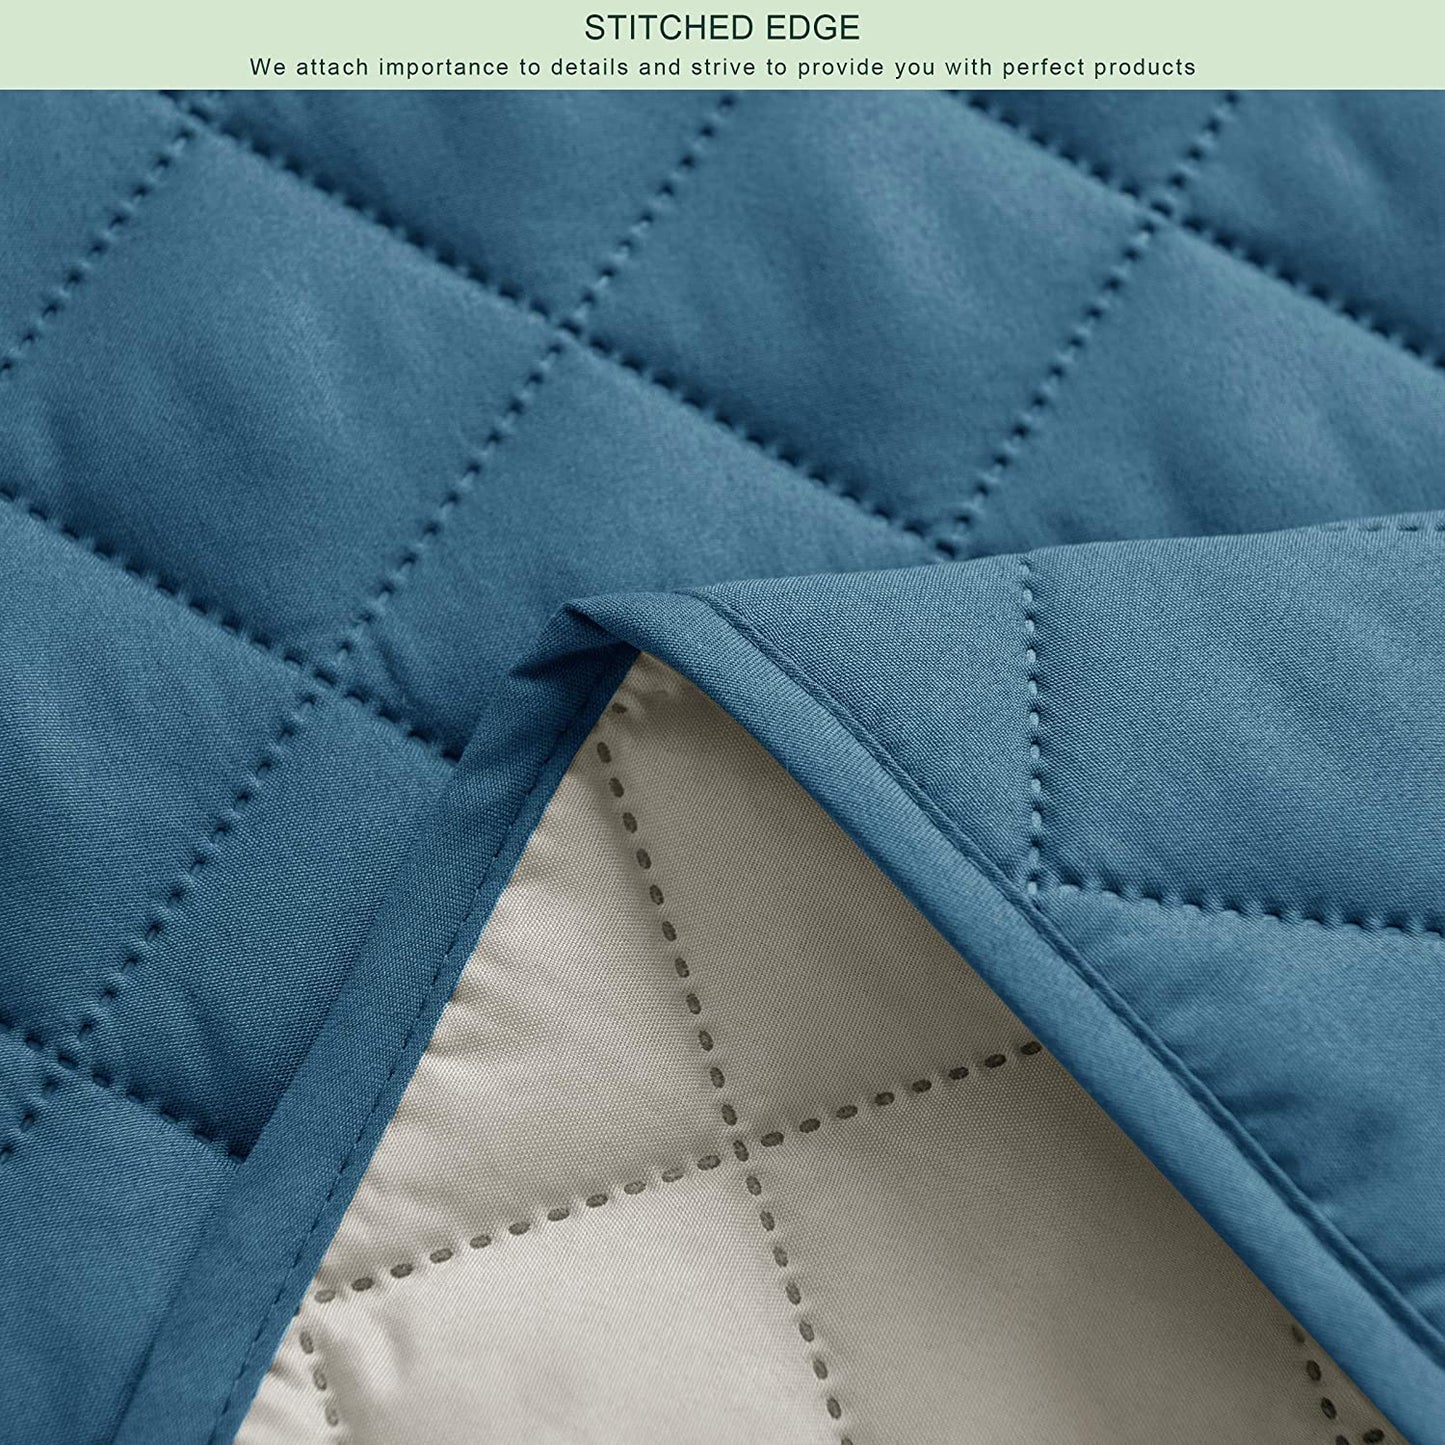 Waterproof Cotton Quilted Sofa Cover - Sofa Runners (Baby Blue)